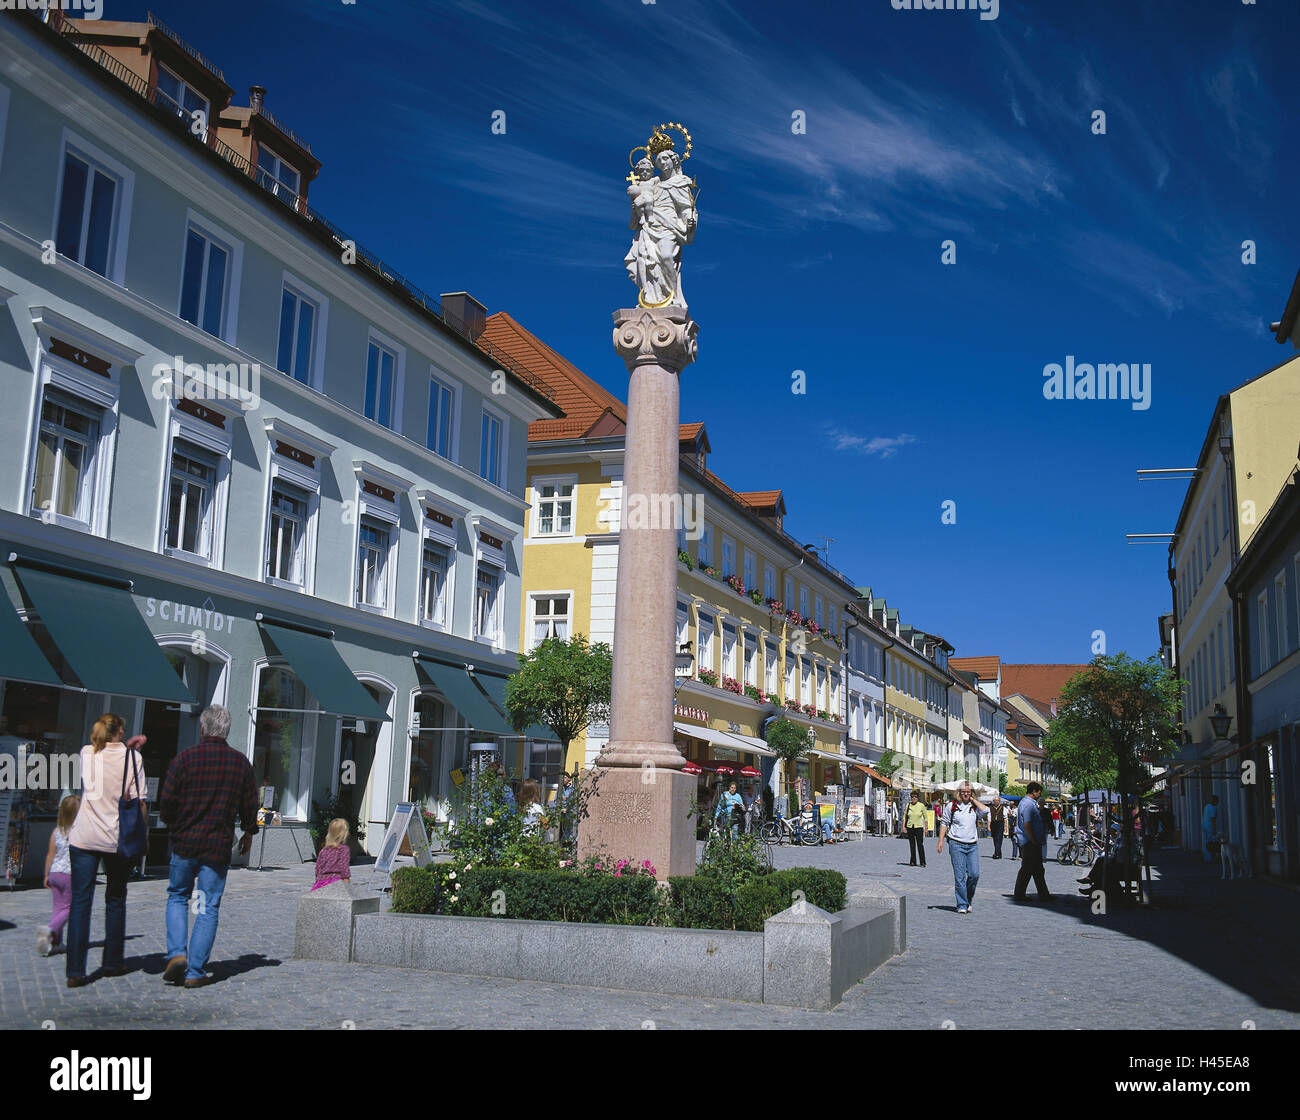 Germany, Bavaria, Murnau in the series lake, Marktstrasse, Marien's pillar, Upper Bavaria, pillar, pedestrian area, monument, place of interest, listed, houses, shops, shops, saunter, stroll, people, outside, city centre, architecture, house line, Stock Photo